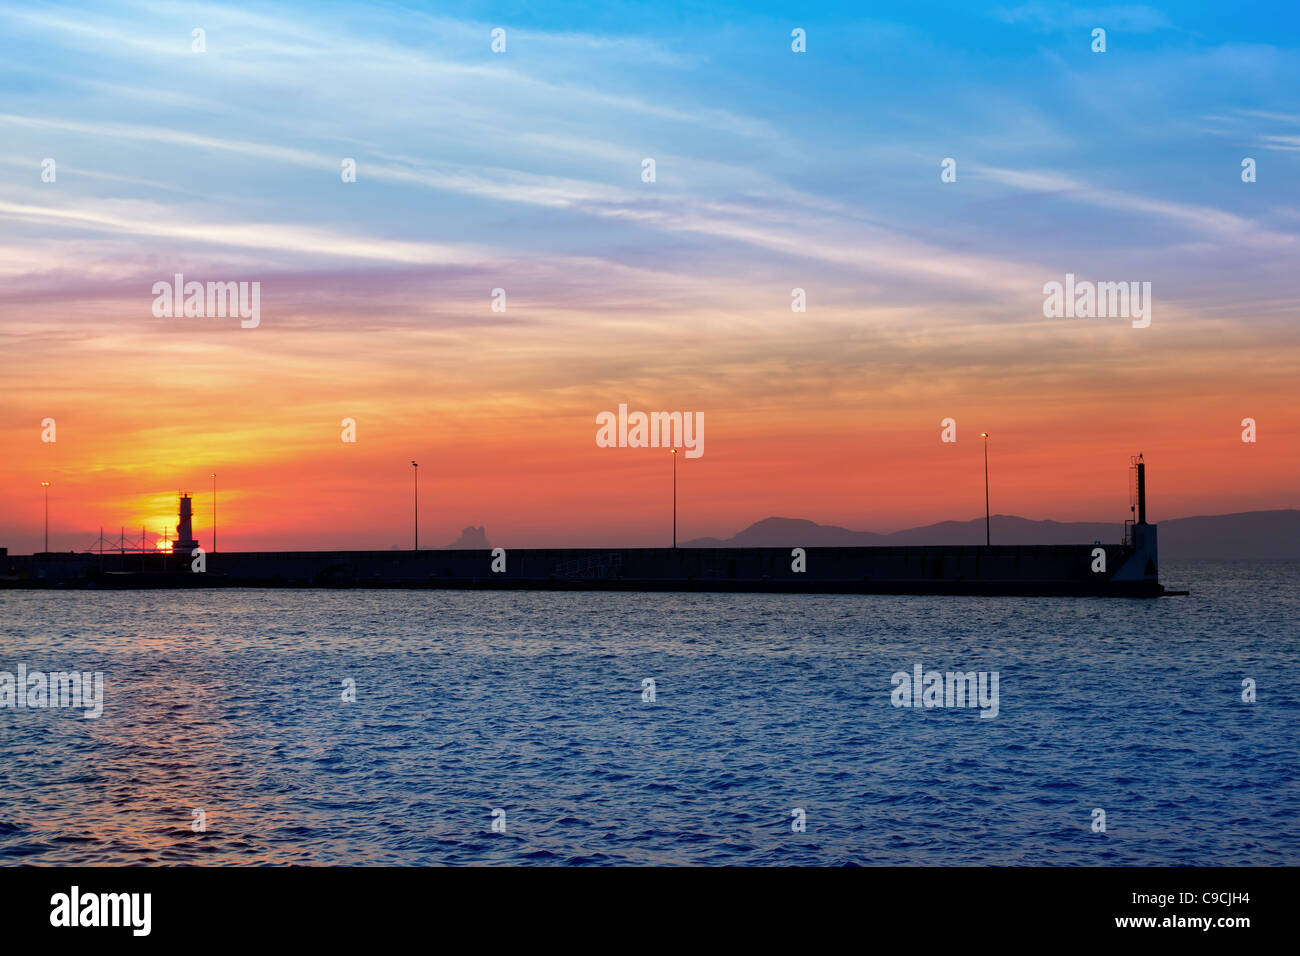 Ibiza mountains on red sunset view from Formentera marina Stock Photo